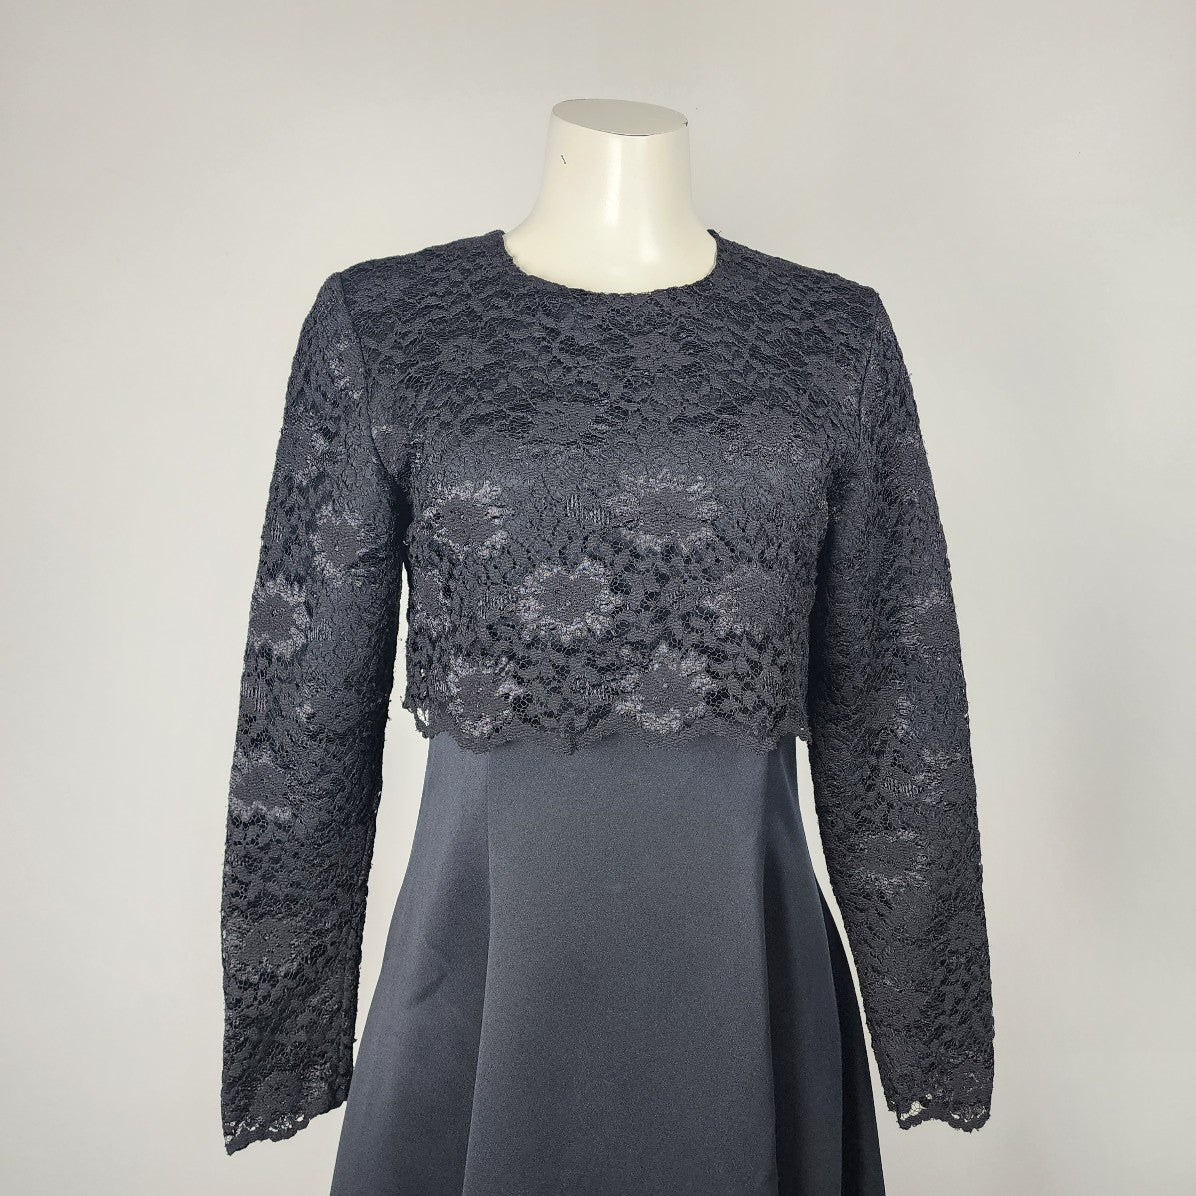 Vintage Black Satin Lace Overlay Long Sleeve Gown Size S